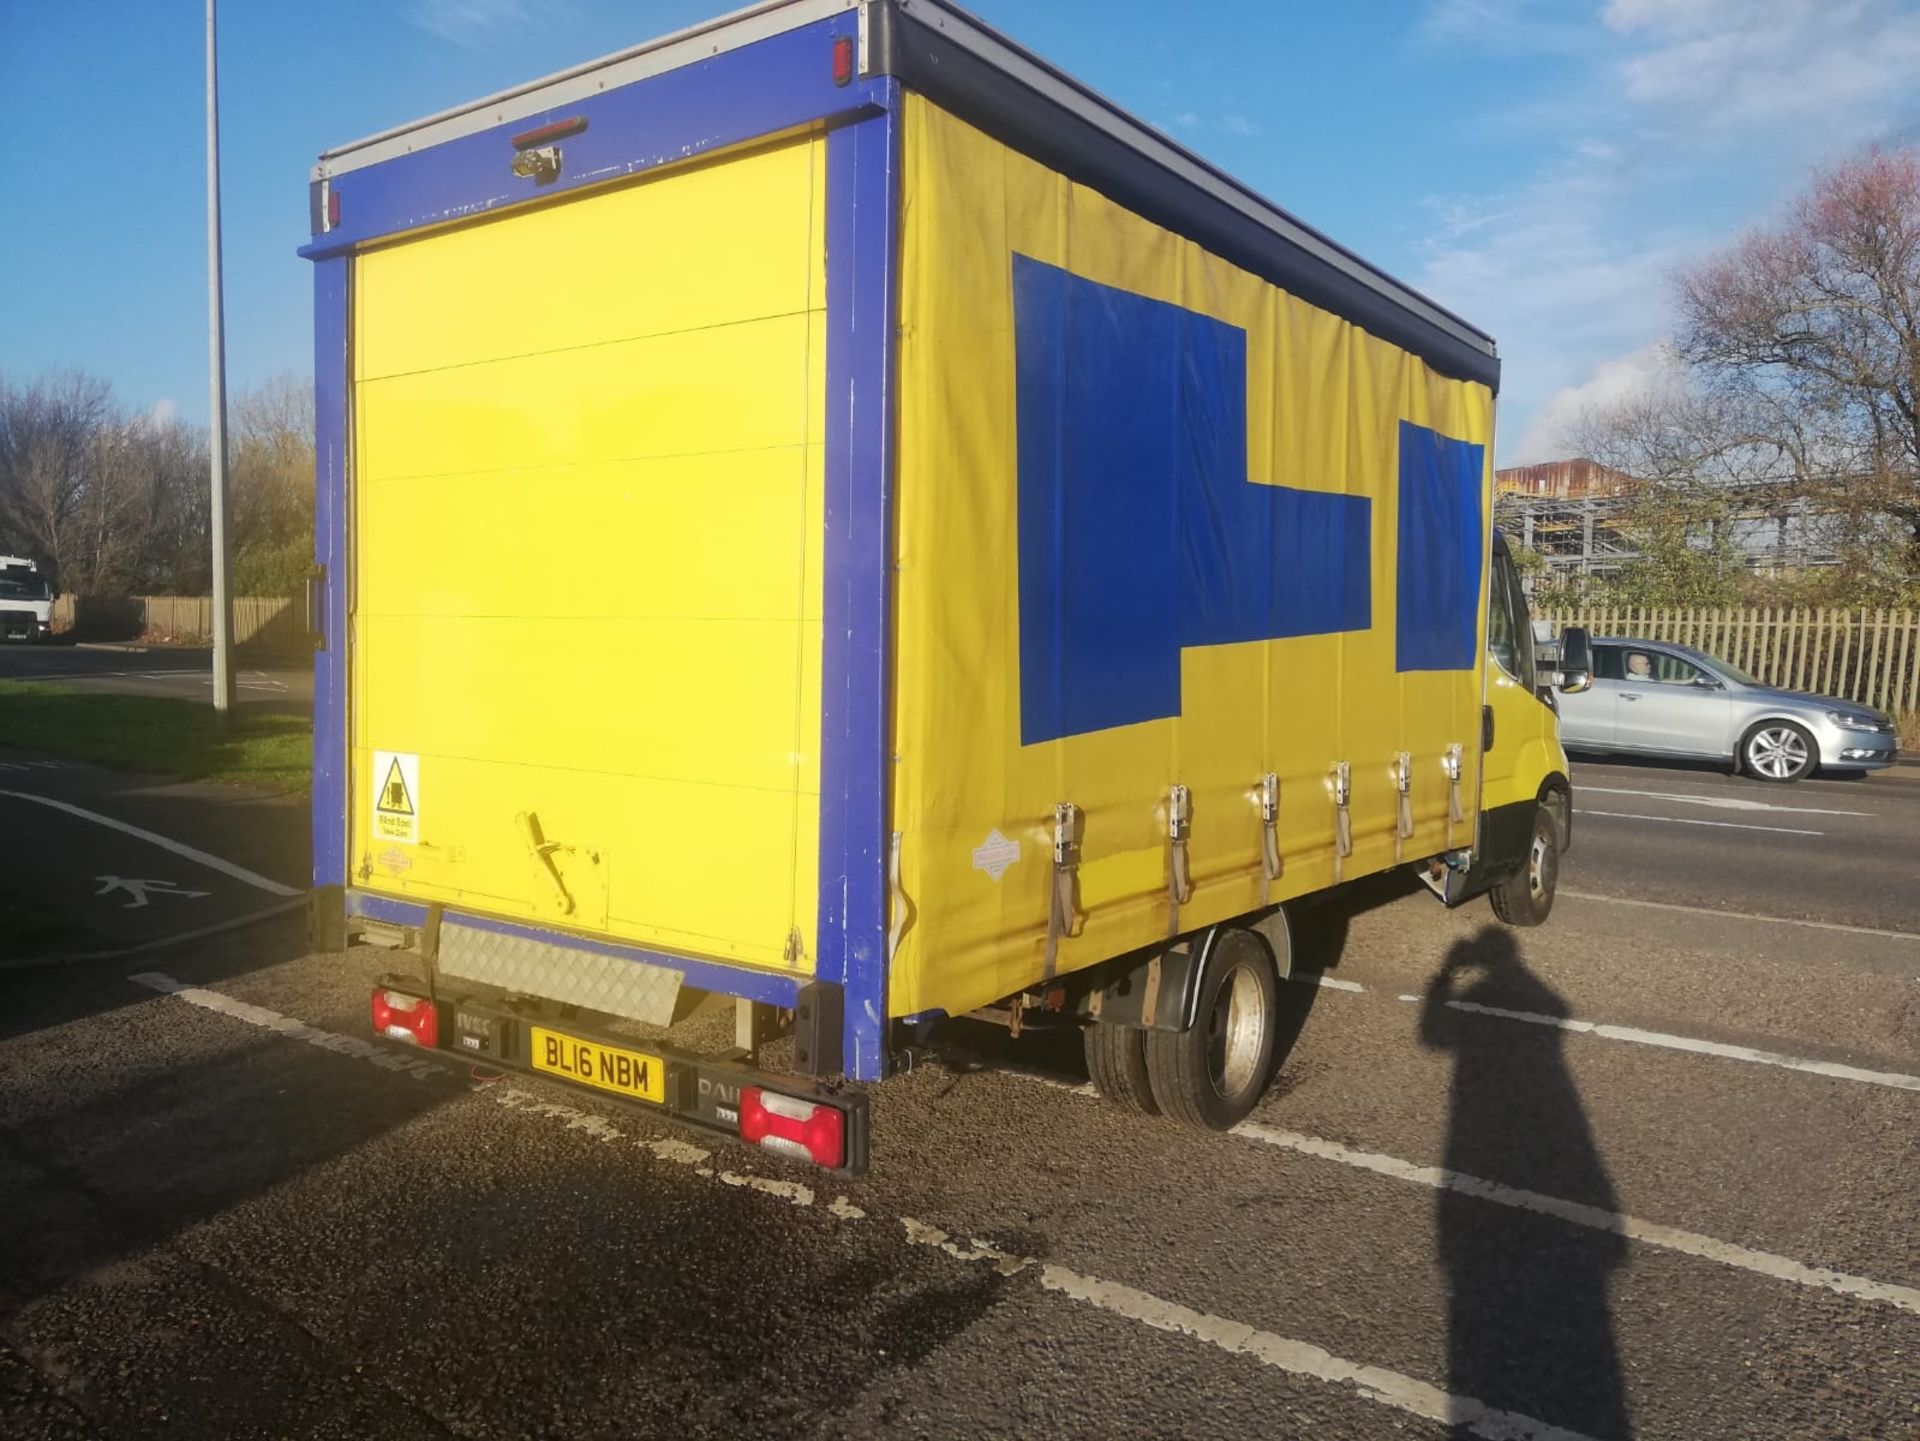 2016 16 IVECO CURTAIN SIDER - 128K MILES - LWB - TWIN REAR WHEEL - BL16 NBM - Image 7 of 10